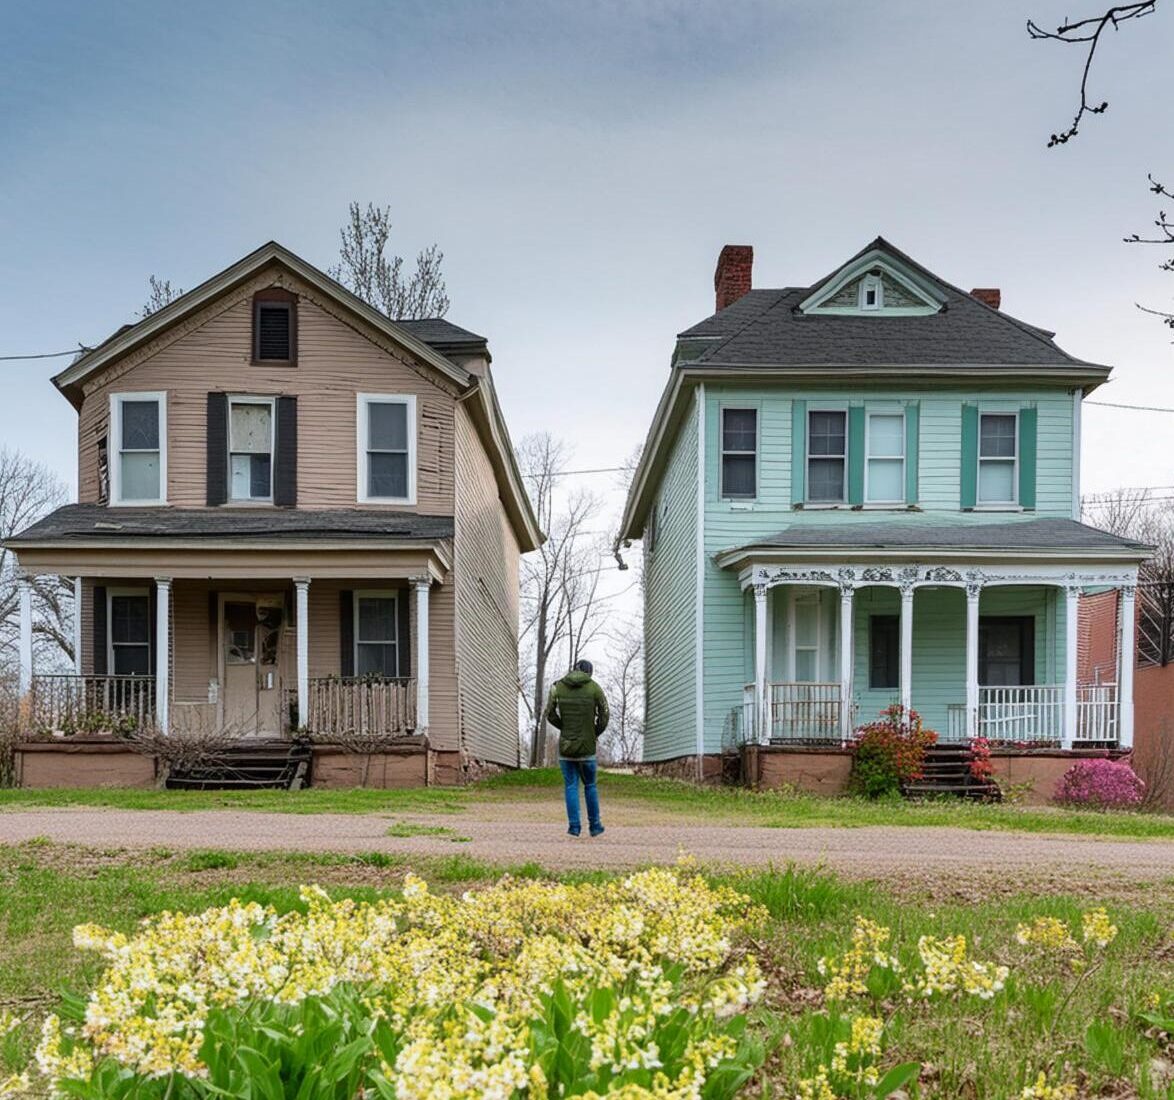 brown and blue house standing side-by-side with man in between them